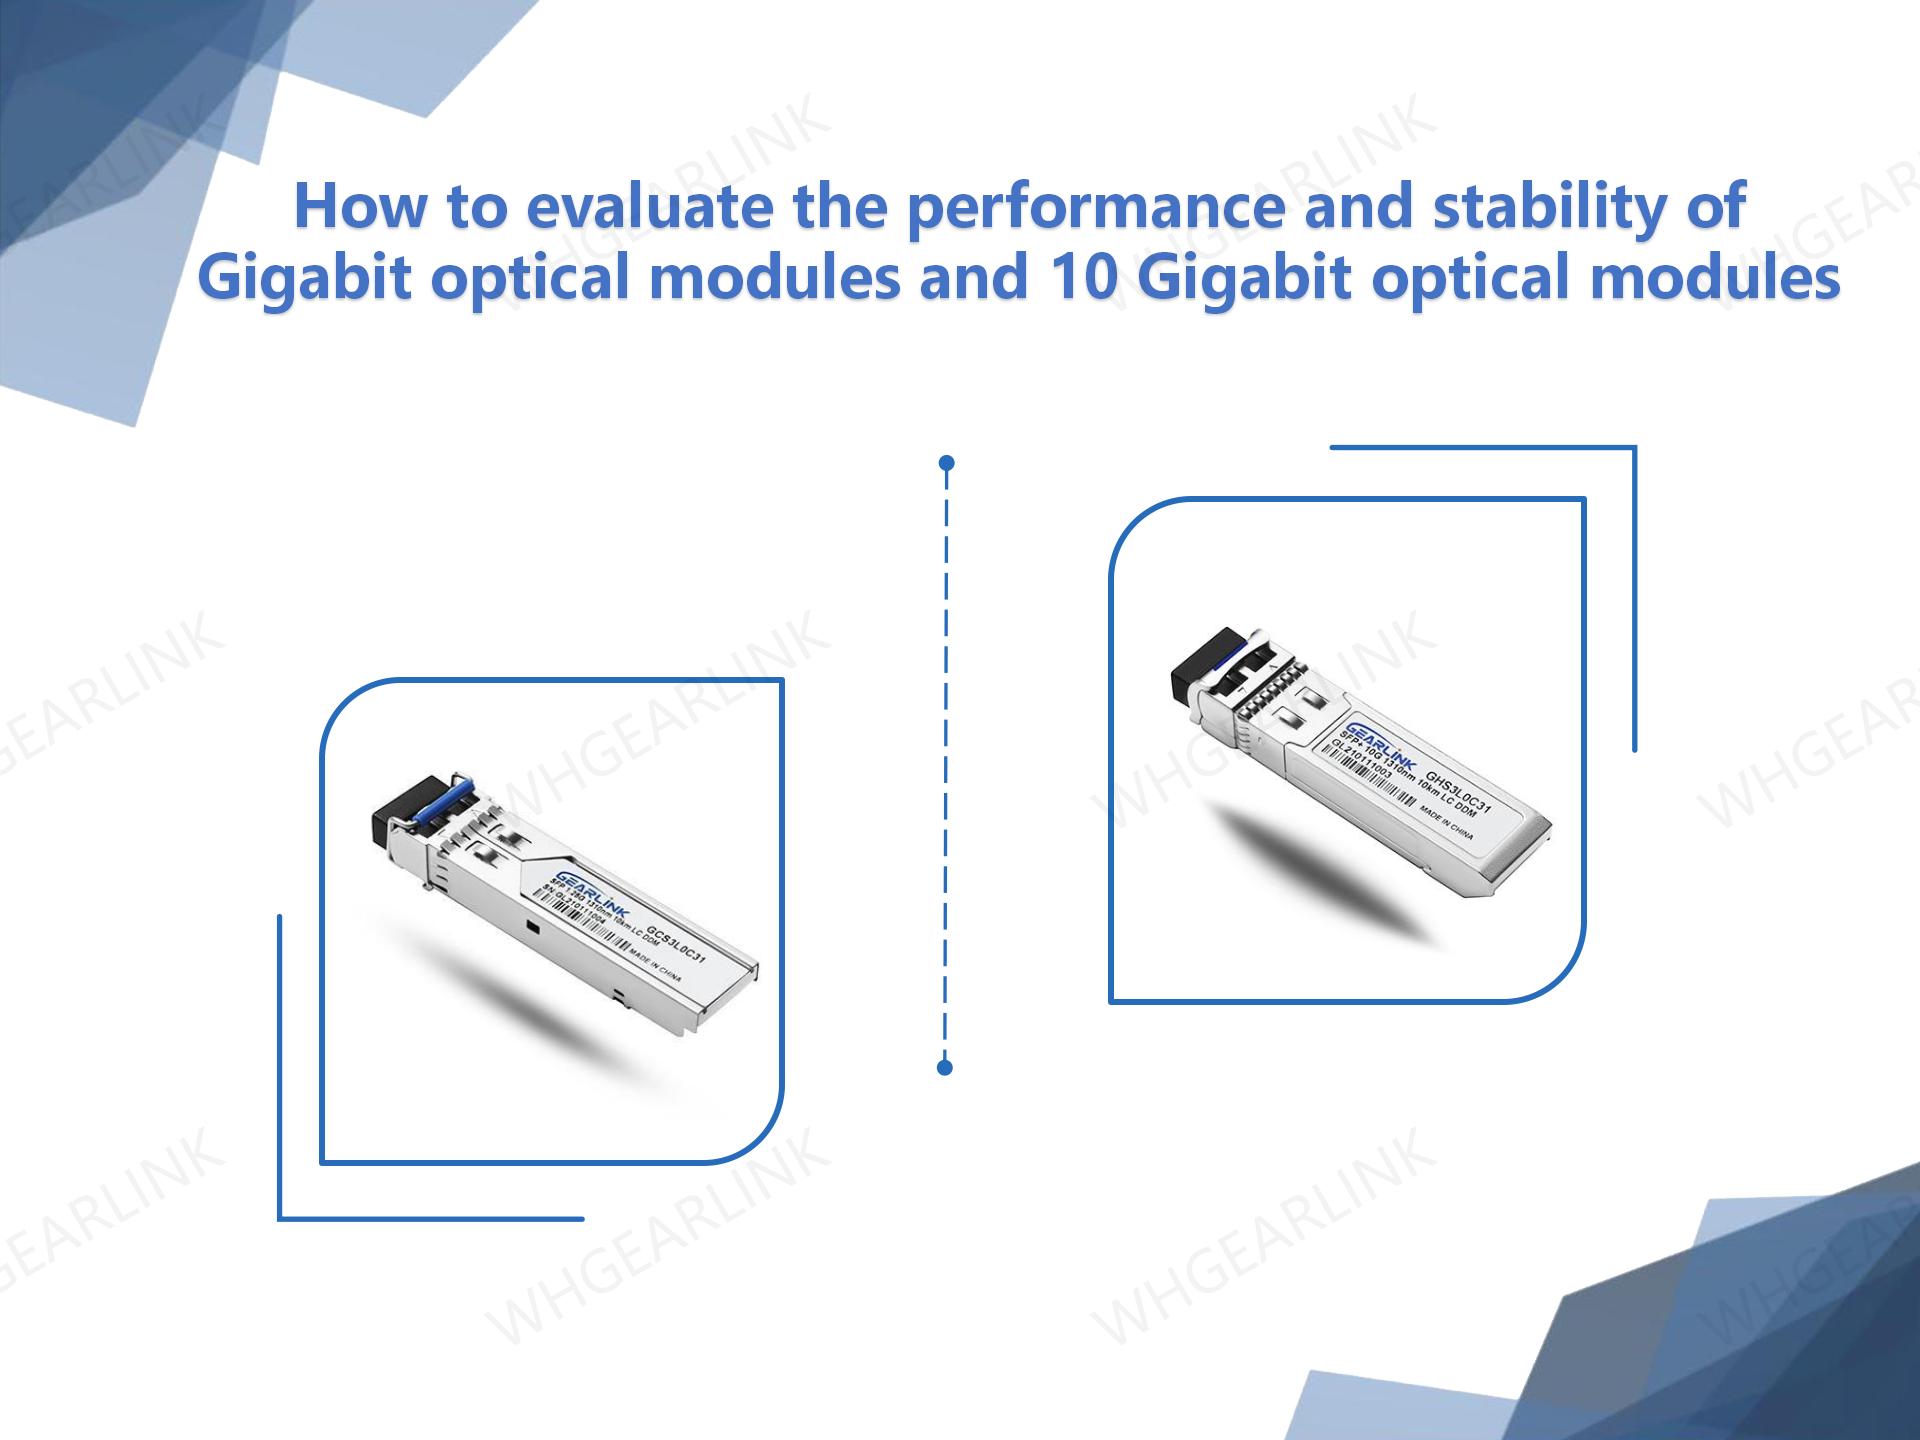 How to evaluate the performance and stability of Gigabit optical modules and 10 Gigabit optical modules